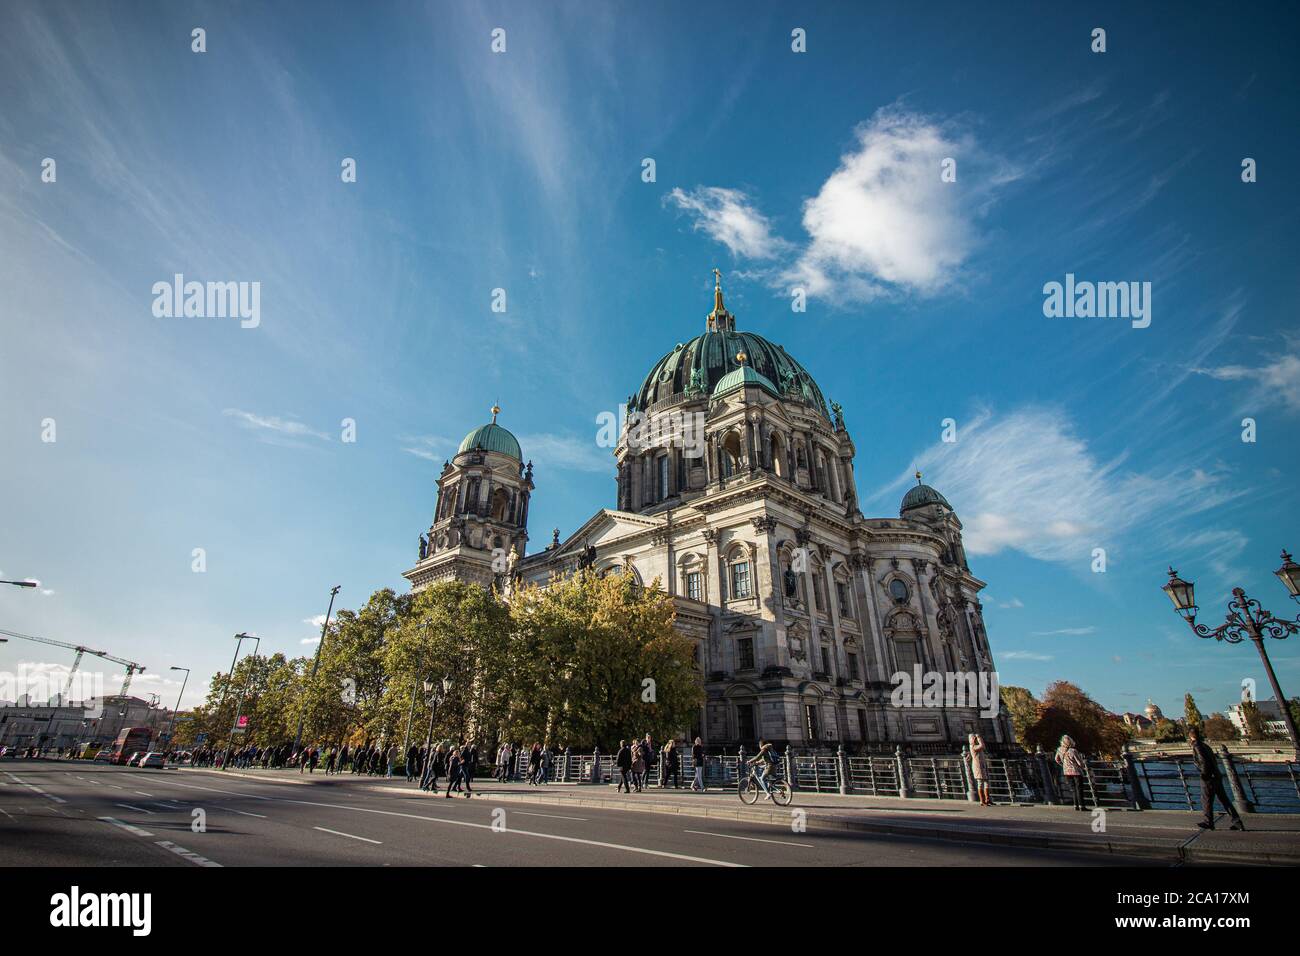 Berlin Cathedral (Berliner Dom) next to Spree River, Berlin, Germany. Stock Photo